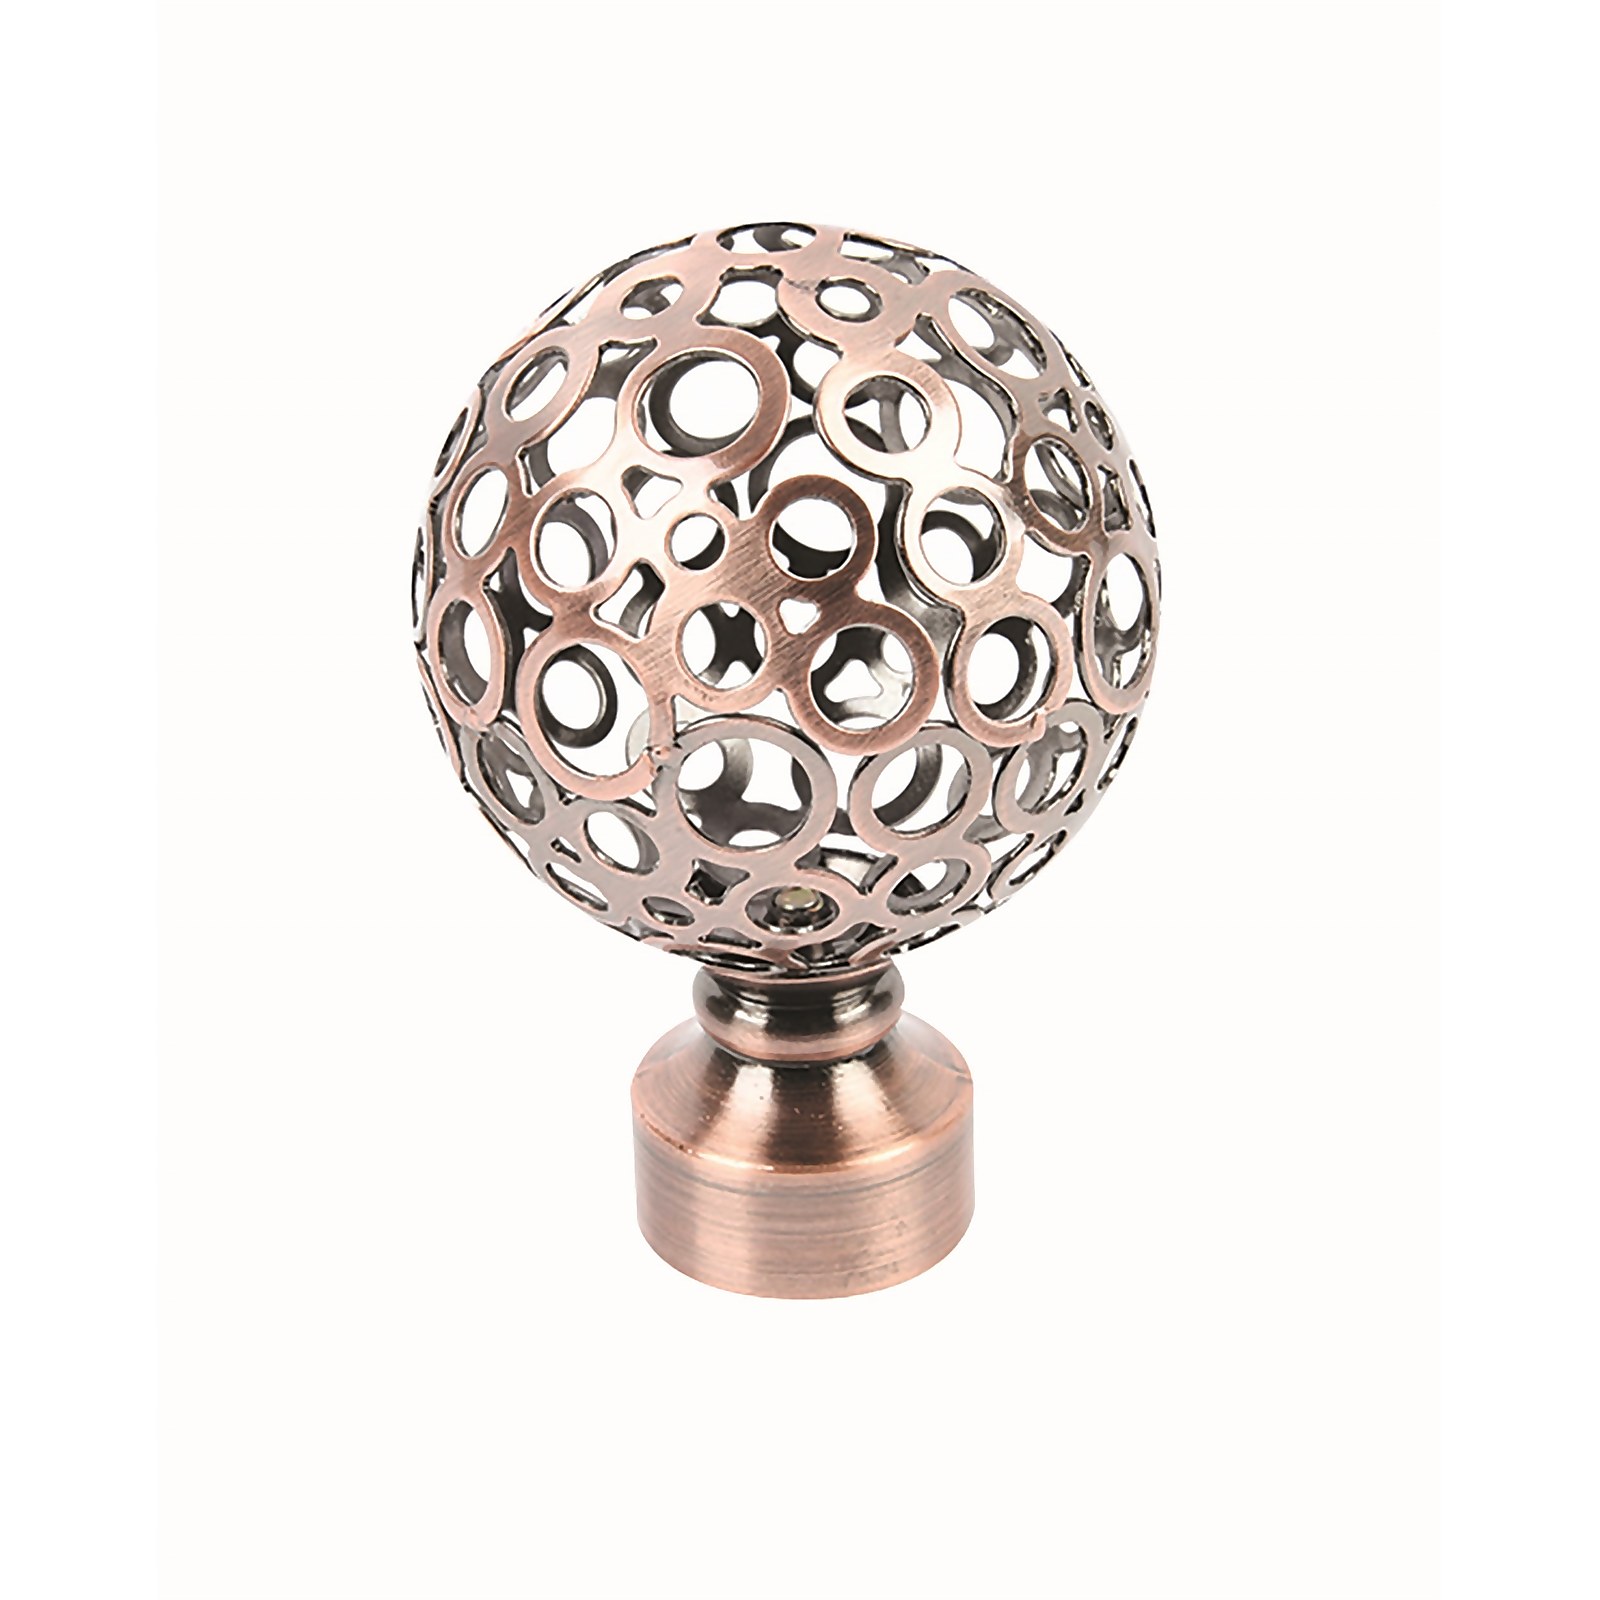 Photo of Patterned Orb Finial - Antique Copper